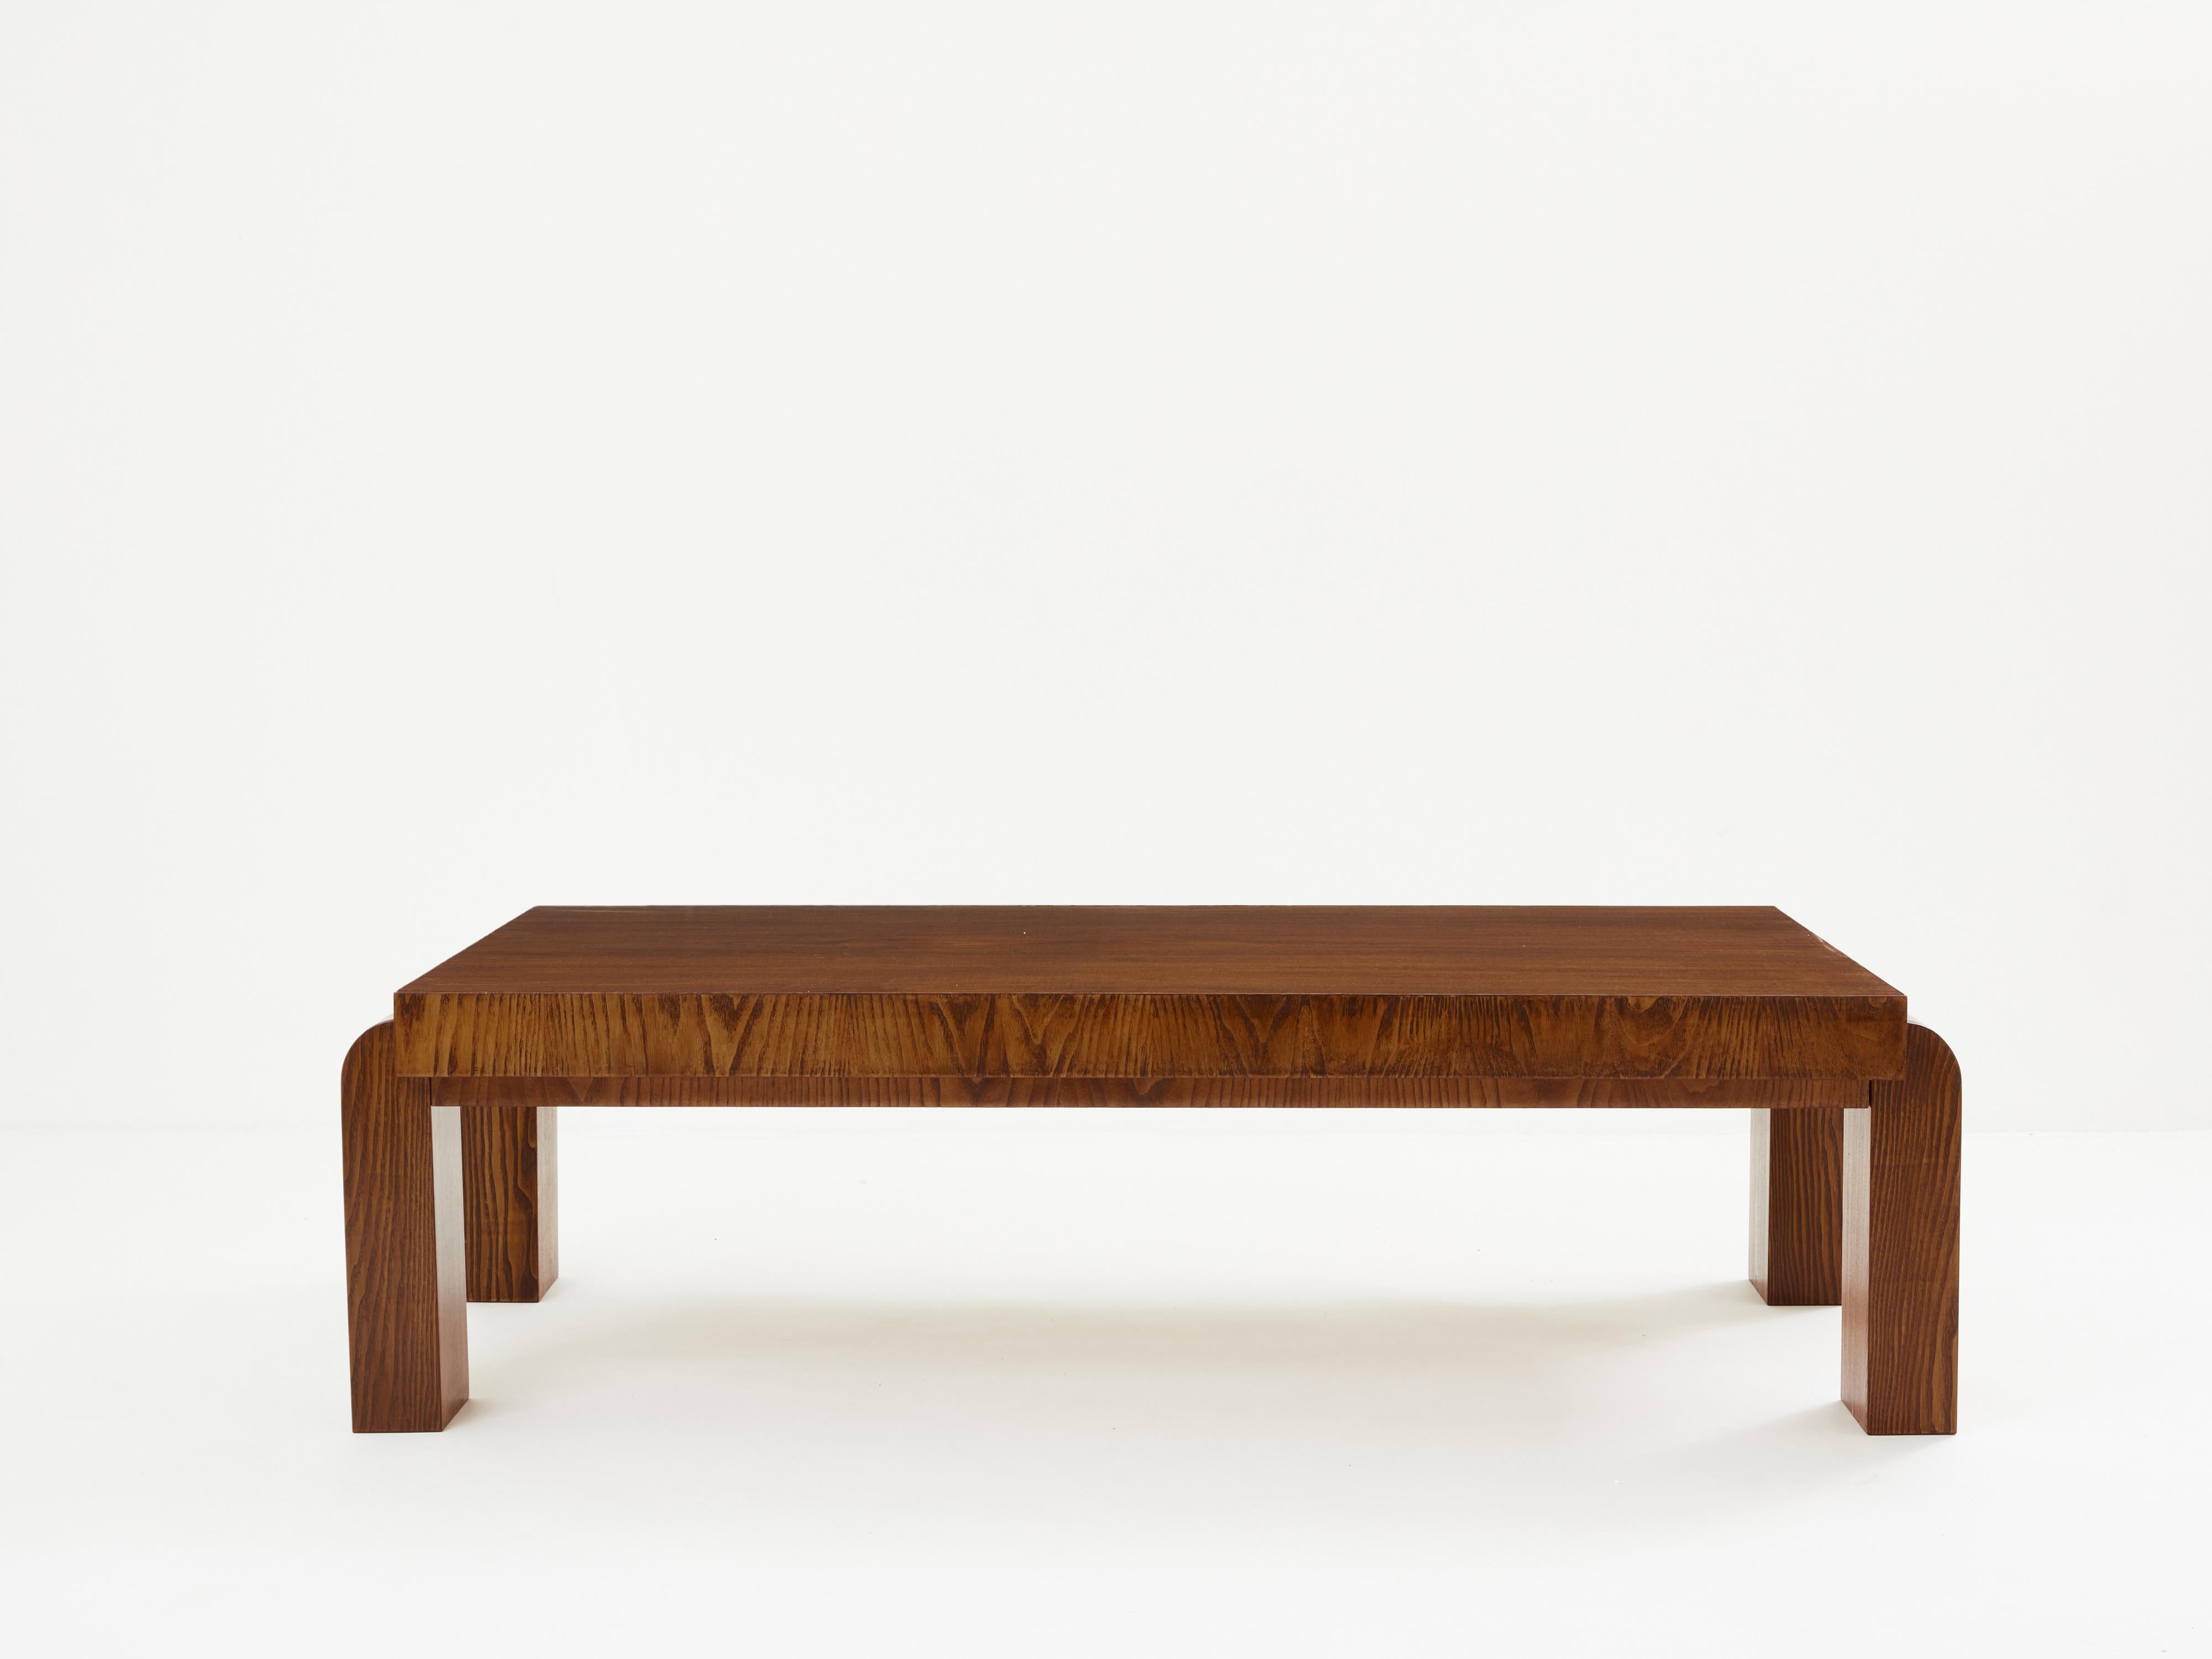 Michel Dufet modernist ashwood coffee table 1930 For Sale 3